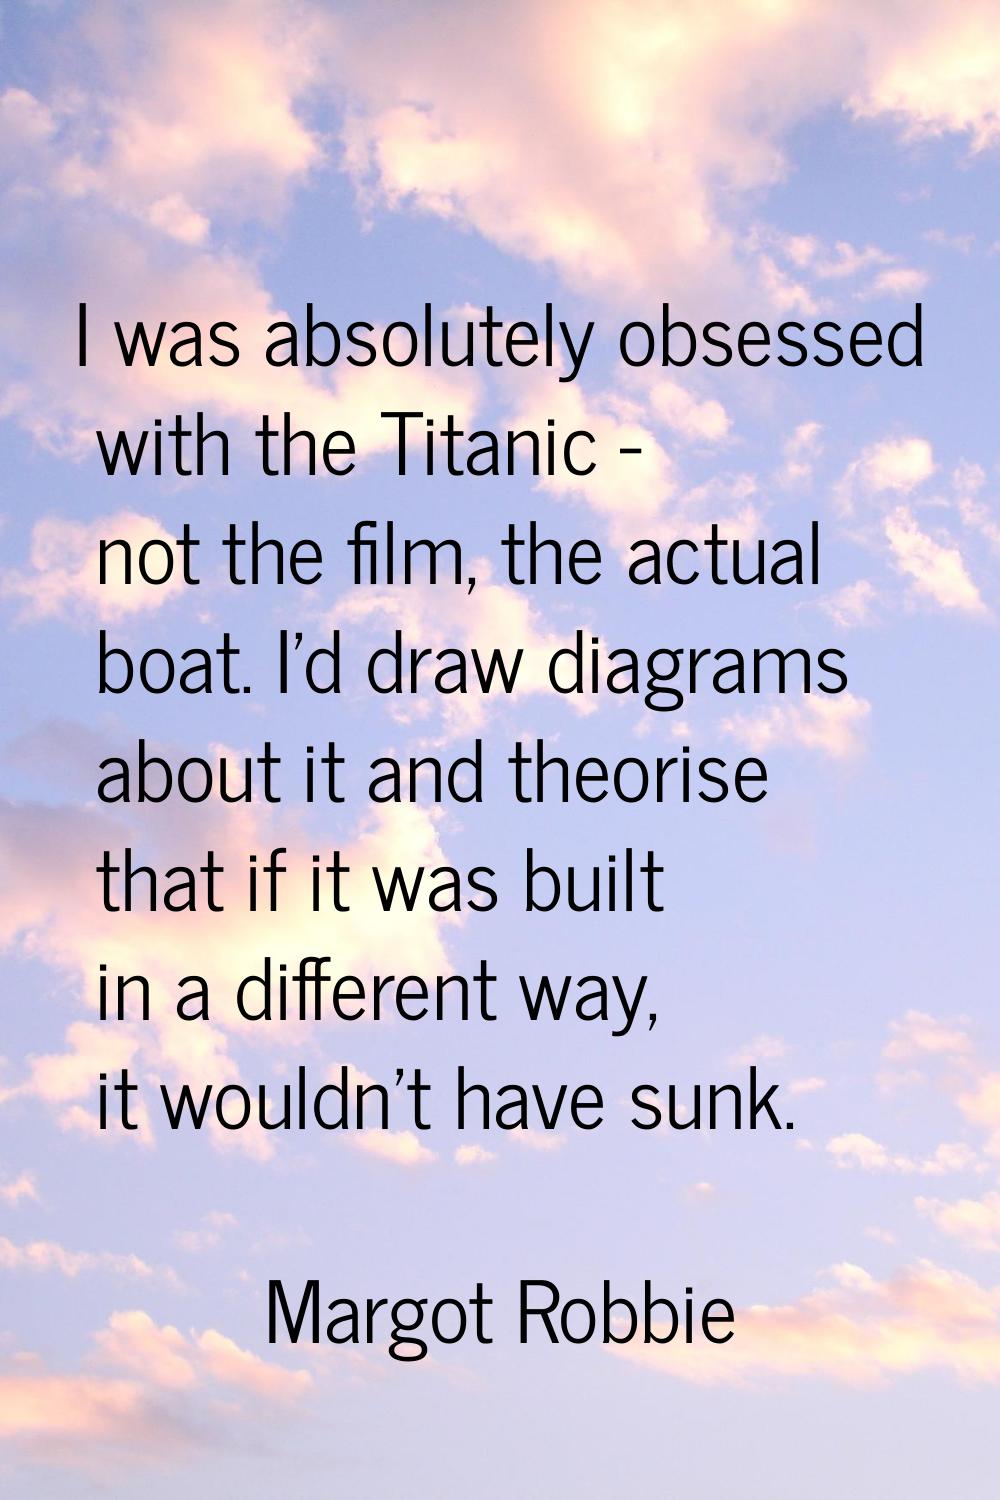 I was absolutely obsessed with the Titanic - not the film, the actual boat. I'd draw diagrams about